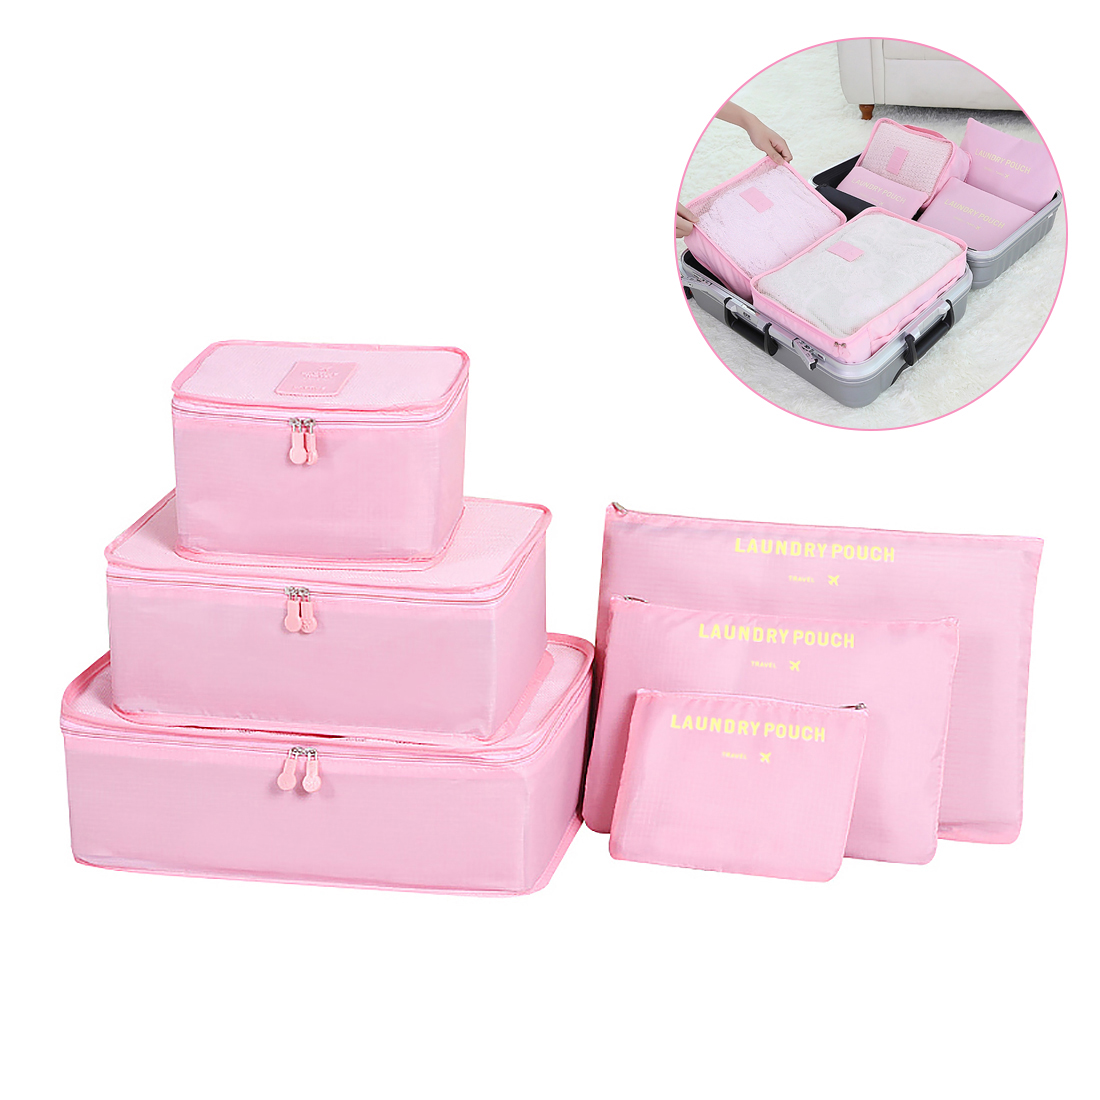 6pcs Waterproof Travel Storage Bags Clothes Packing Cube Luggage Organizer - Pink